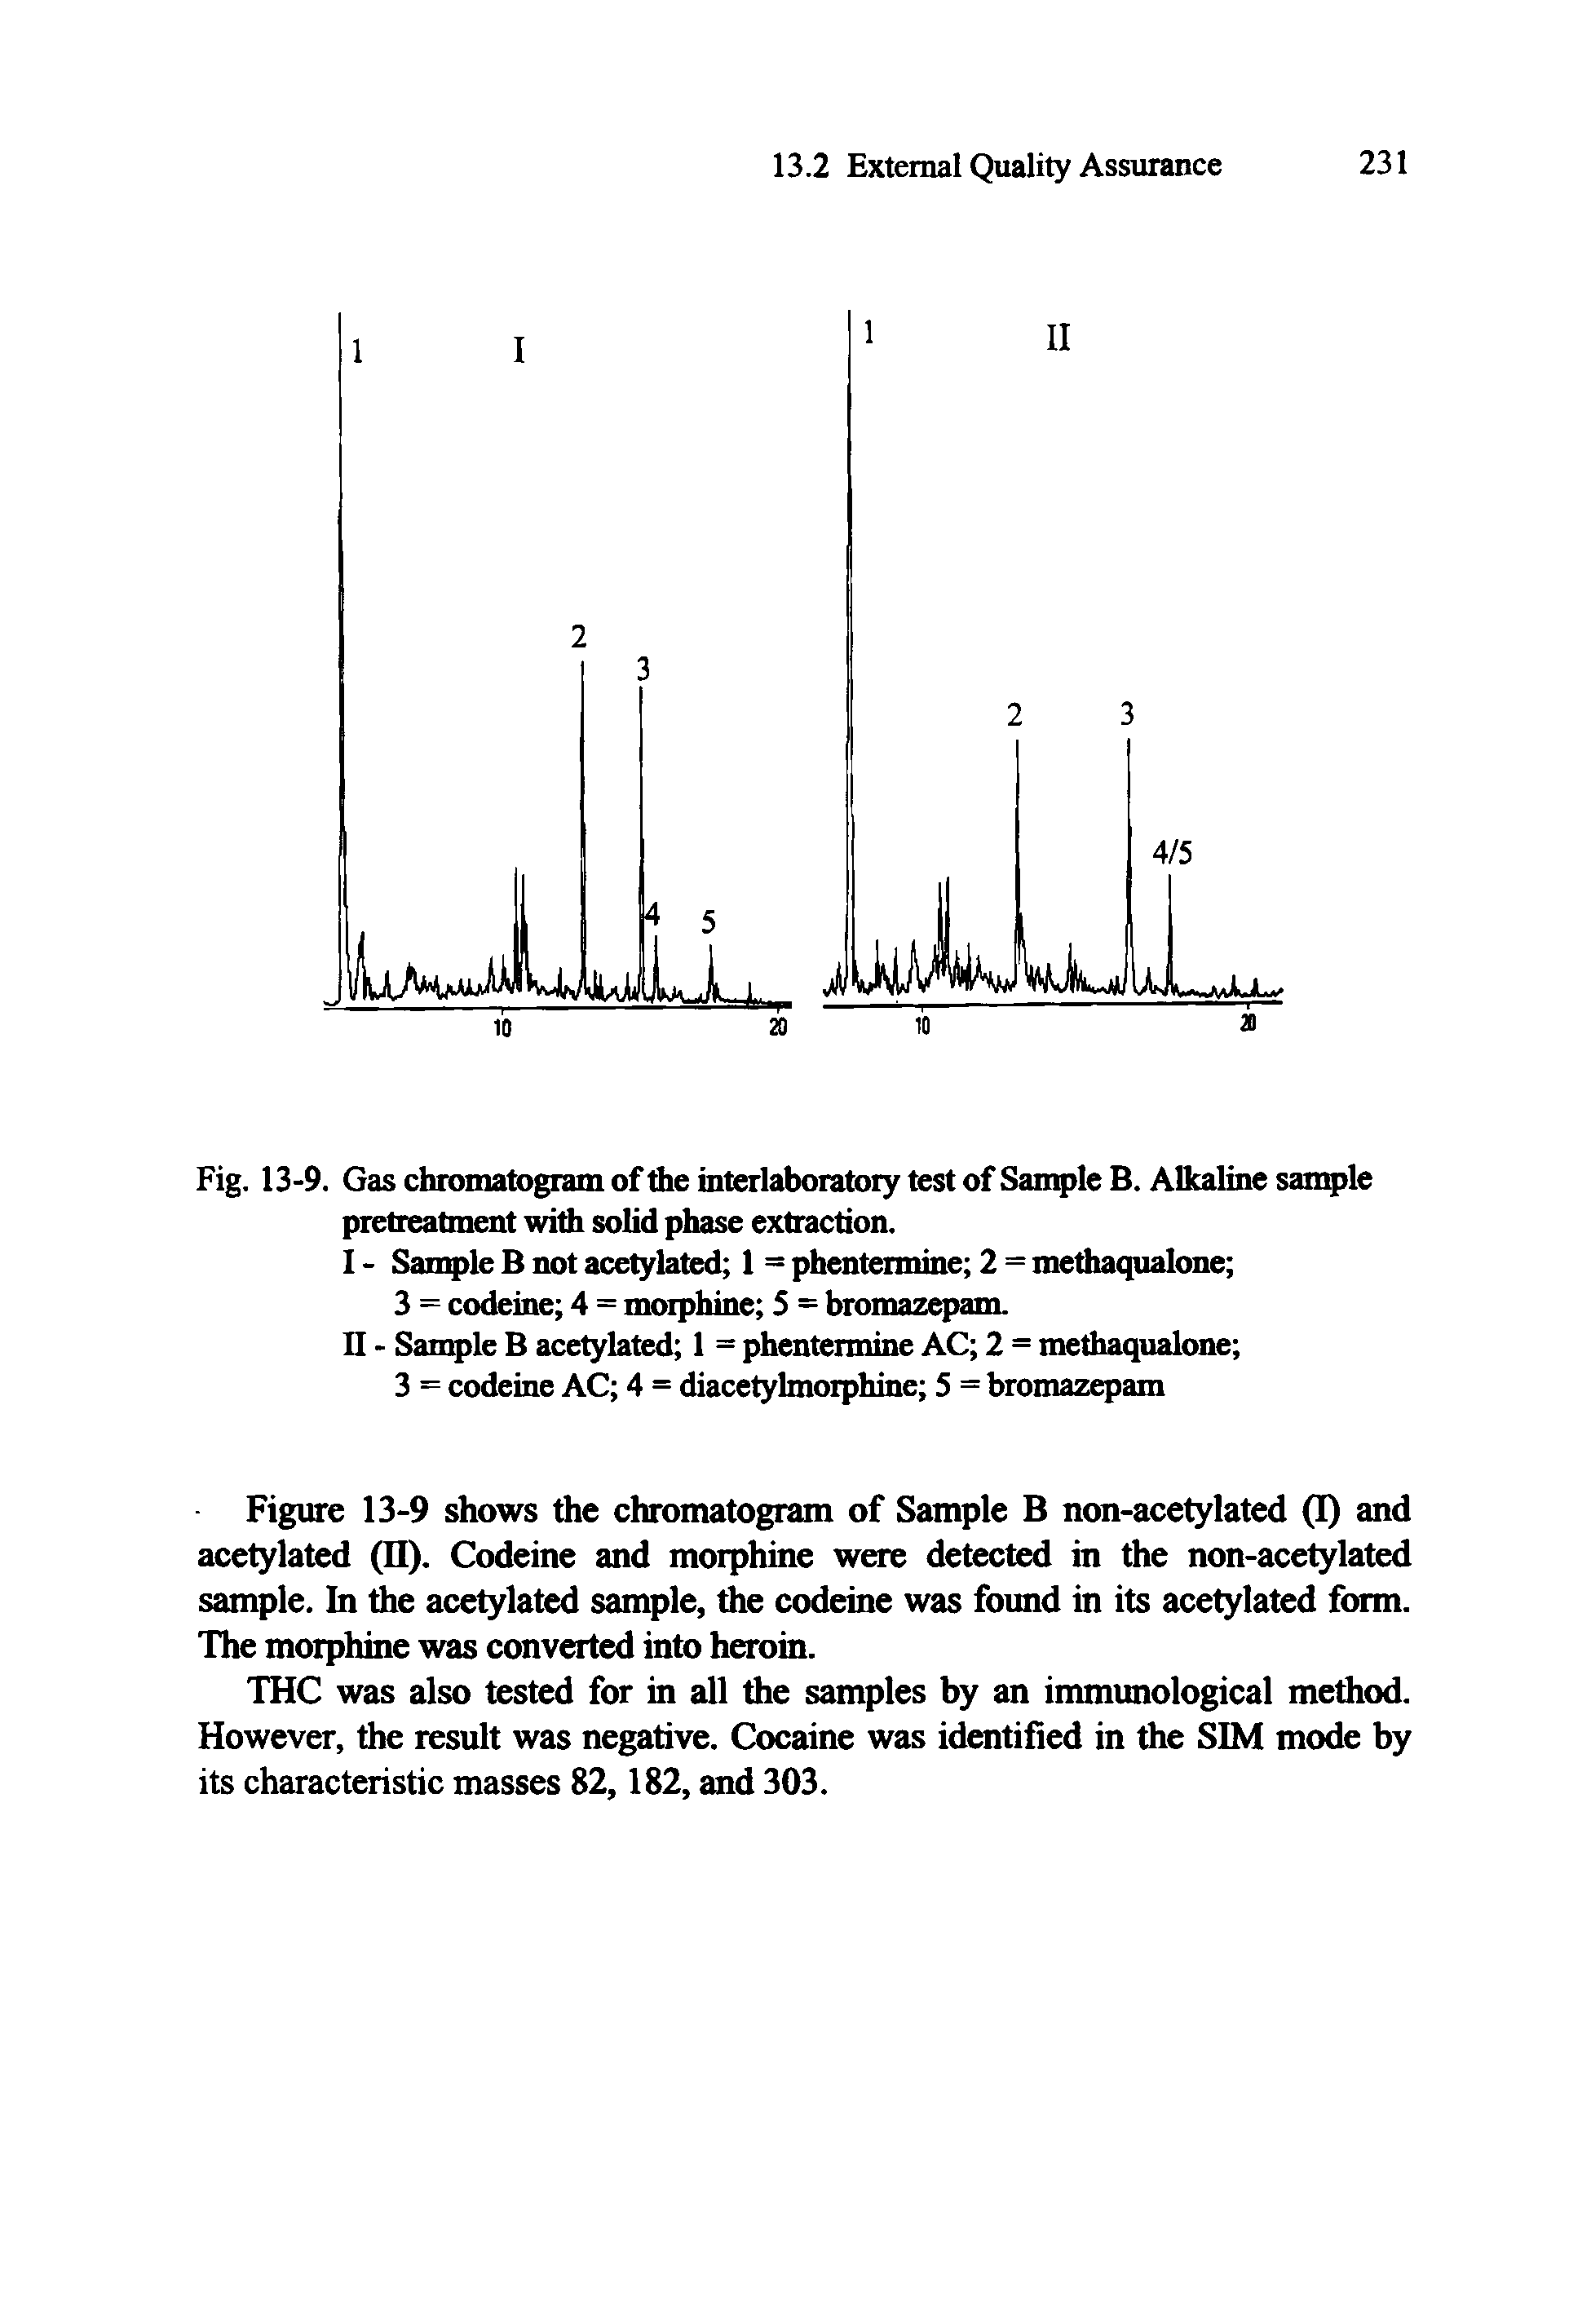 Fig. 13-9. Gas chromatogram of die interlaboratory test of Sample B. Alkaline sample pretreatment with solid phase extraction.